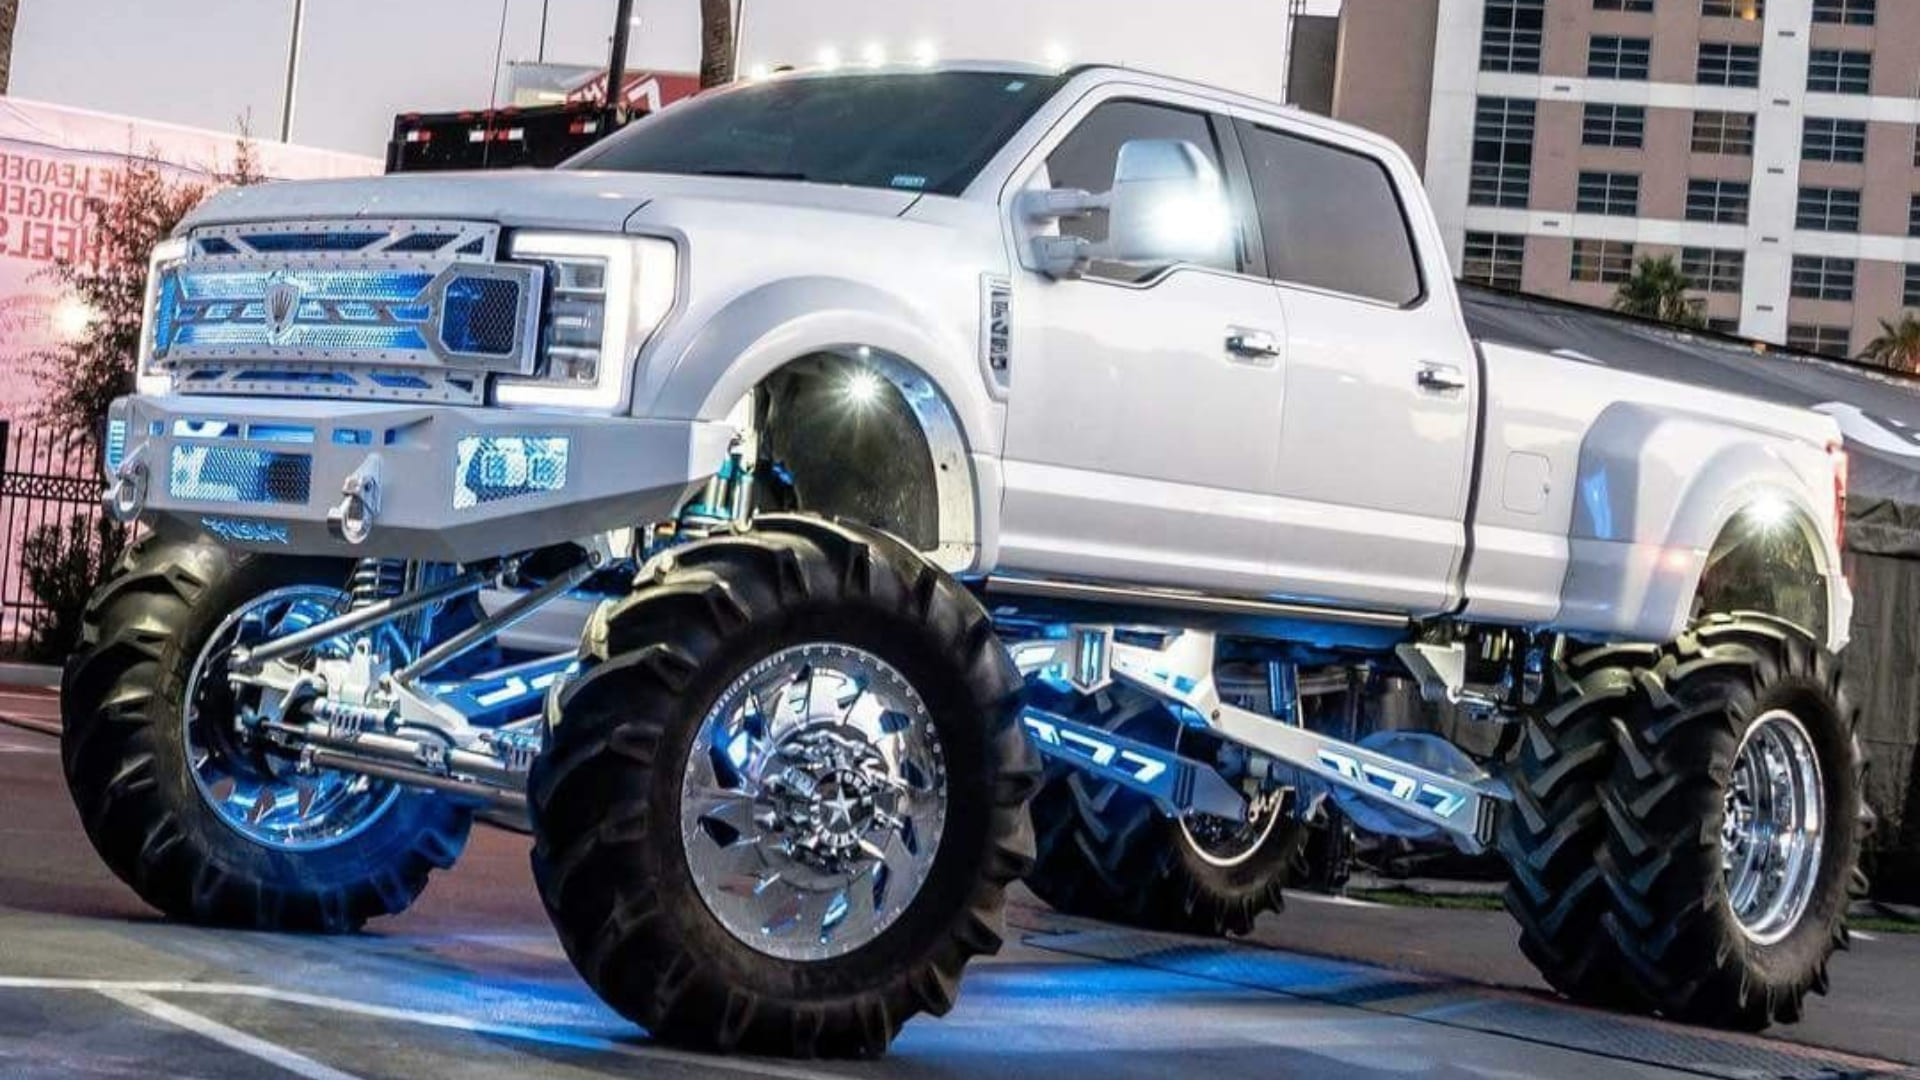 Lifted Truck Wallpapers